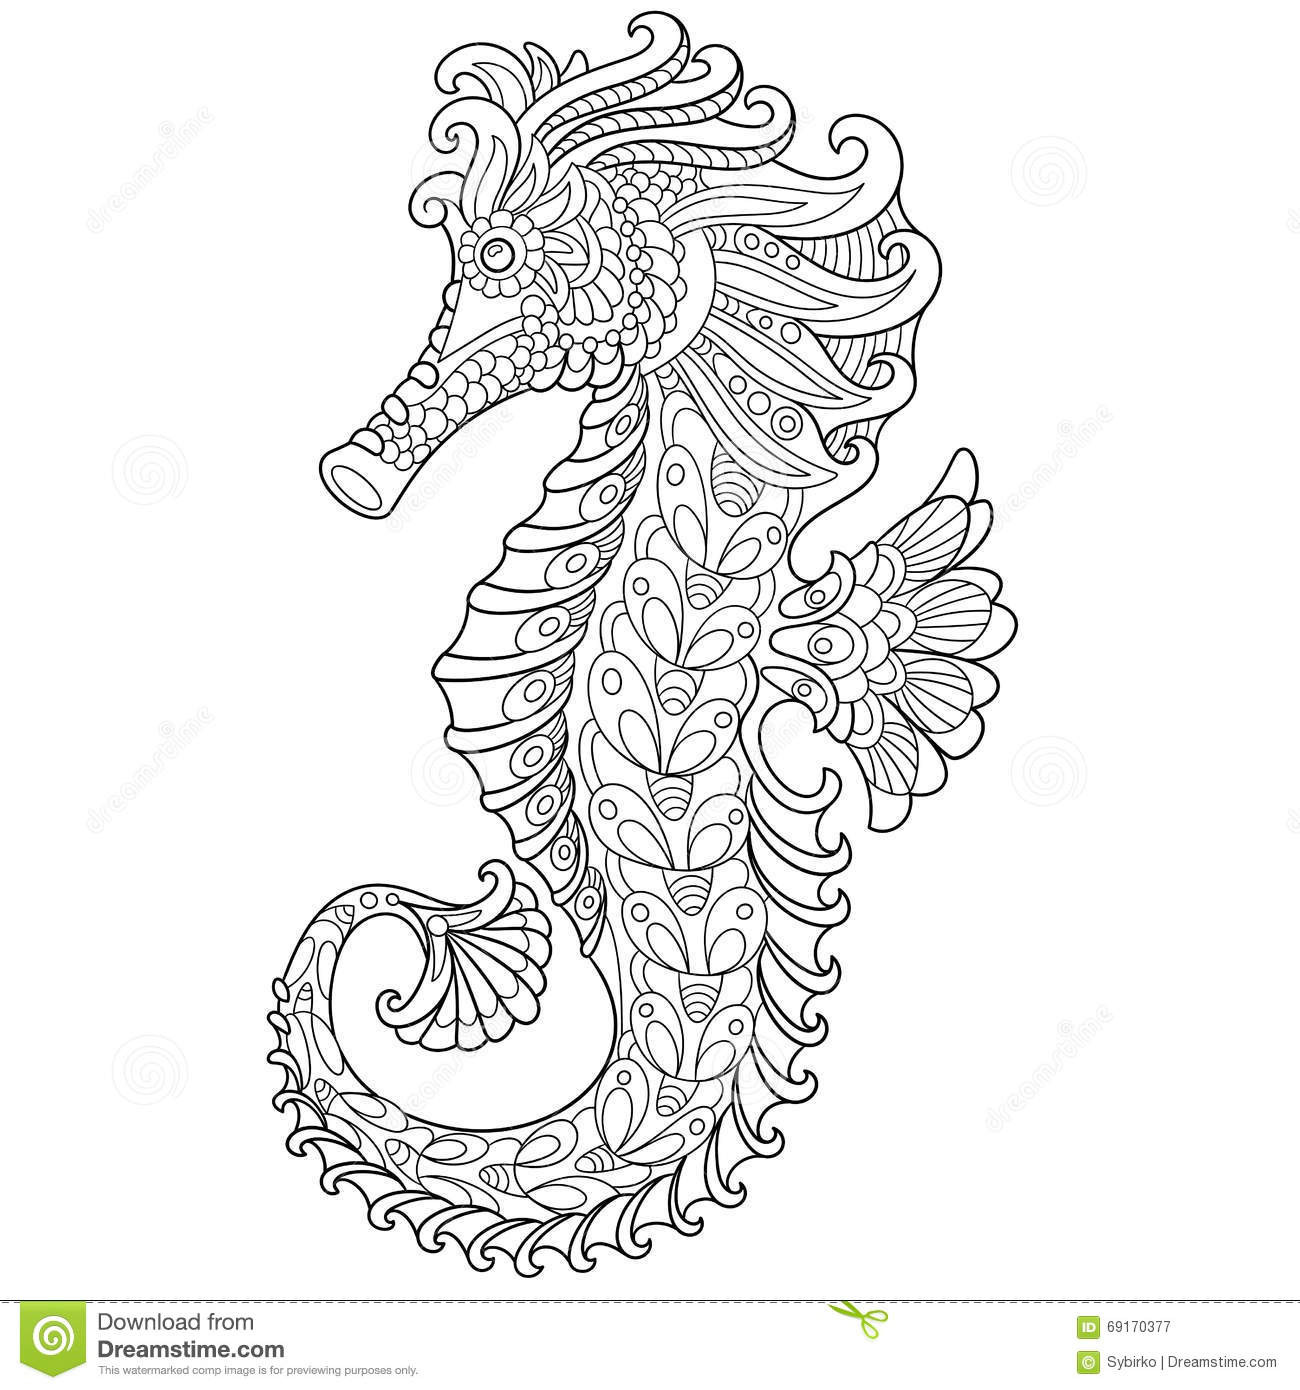 Seahorse Coloring Pages For Adults
 Zentangle Stylized Seahorse Stock Vector Illustration of